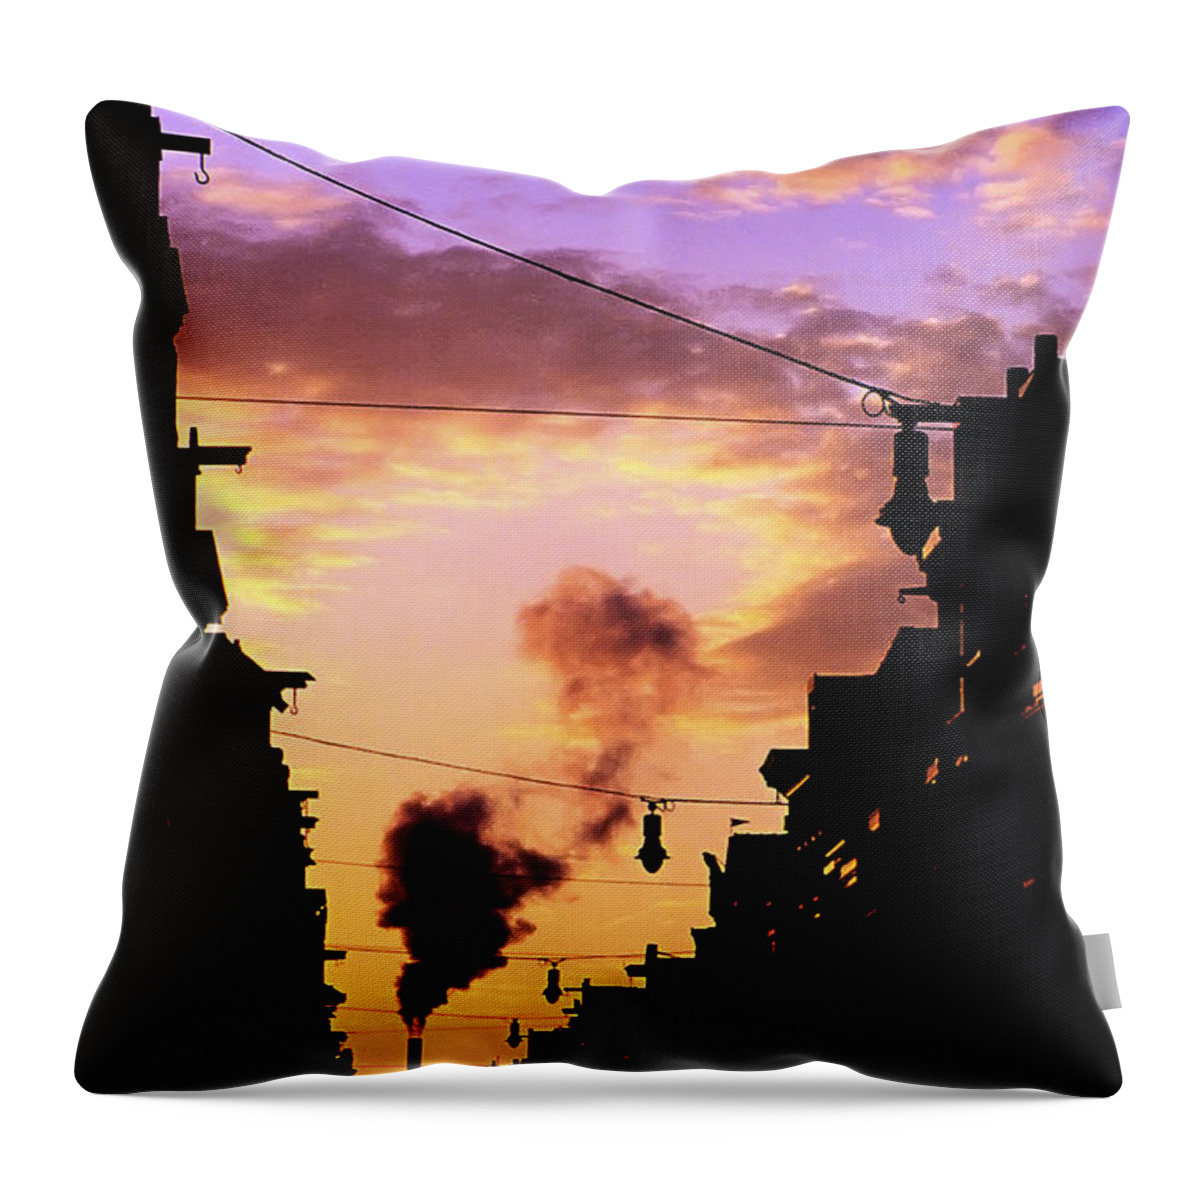 Haarlemmerstraat Throw Pillow featuring the photograph Haarlemmerstraat by Fabrizio Troiani